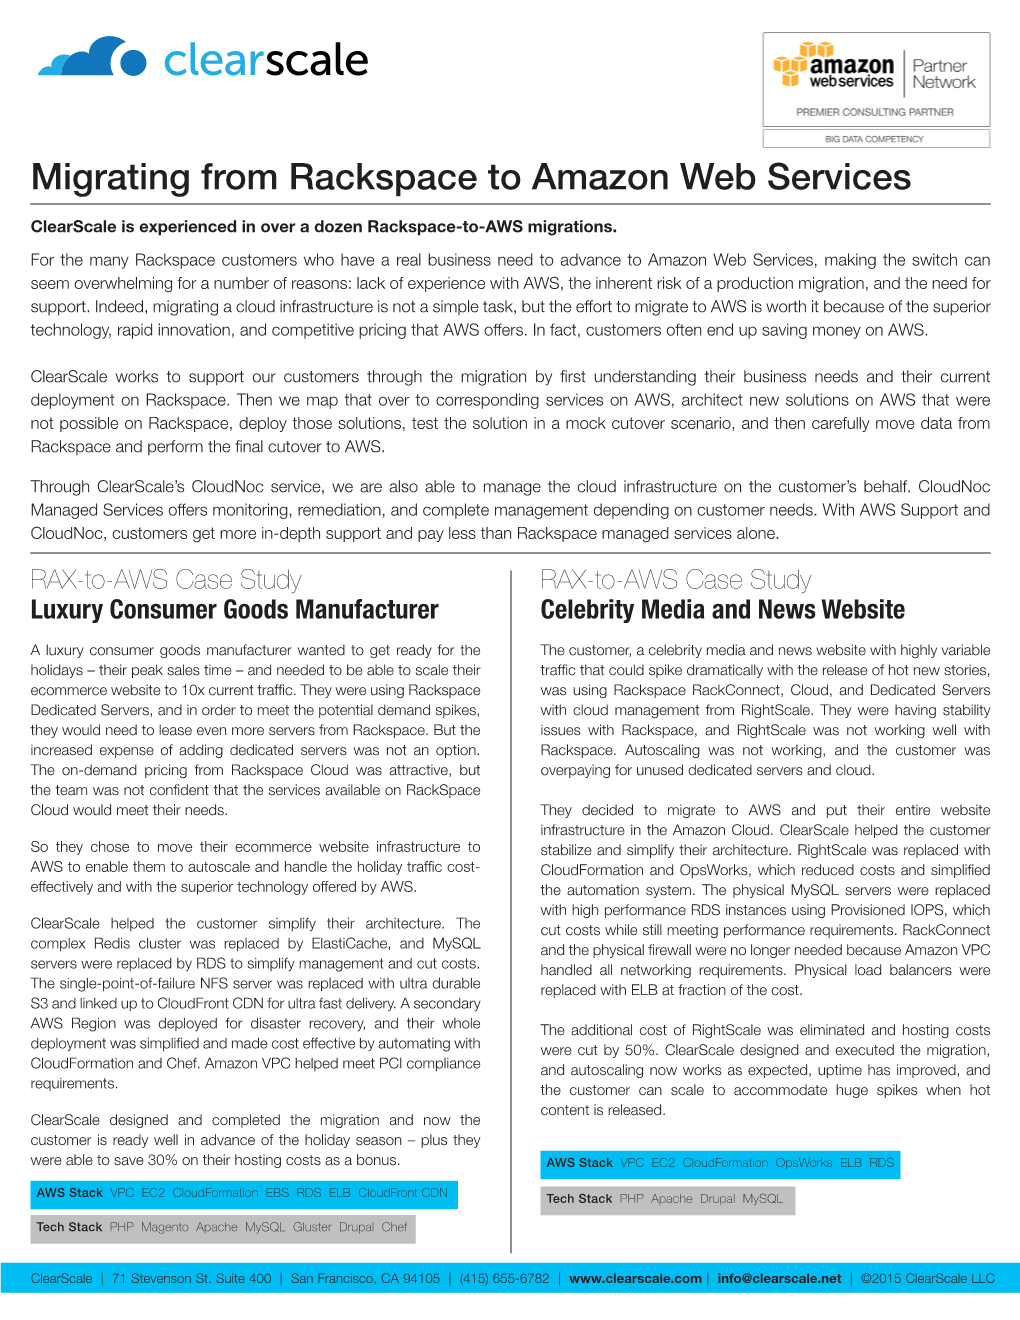 Download Migrating from Rackspace to Amazon Web Services